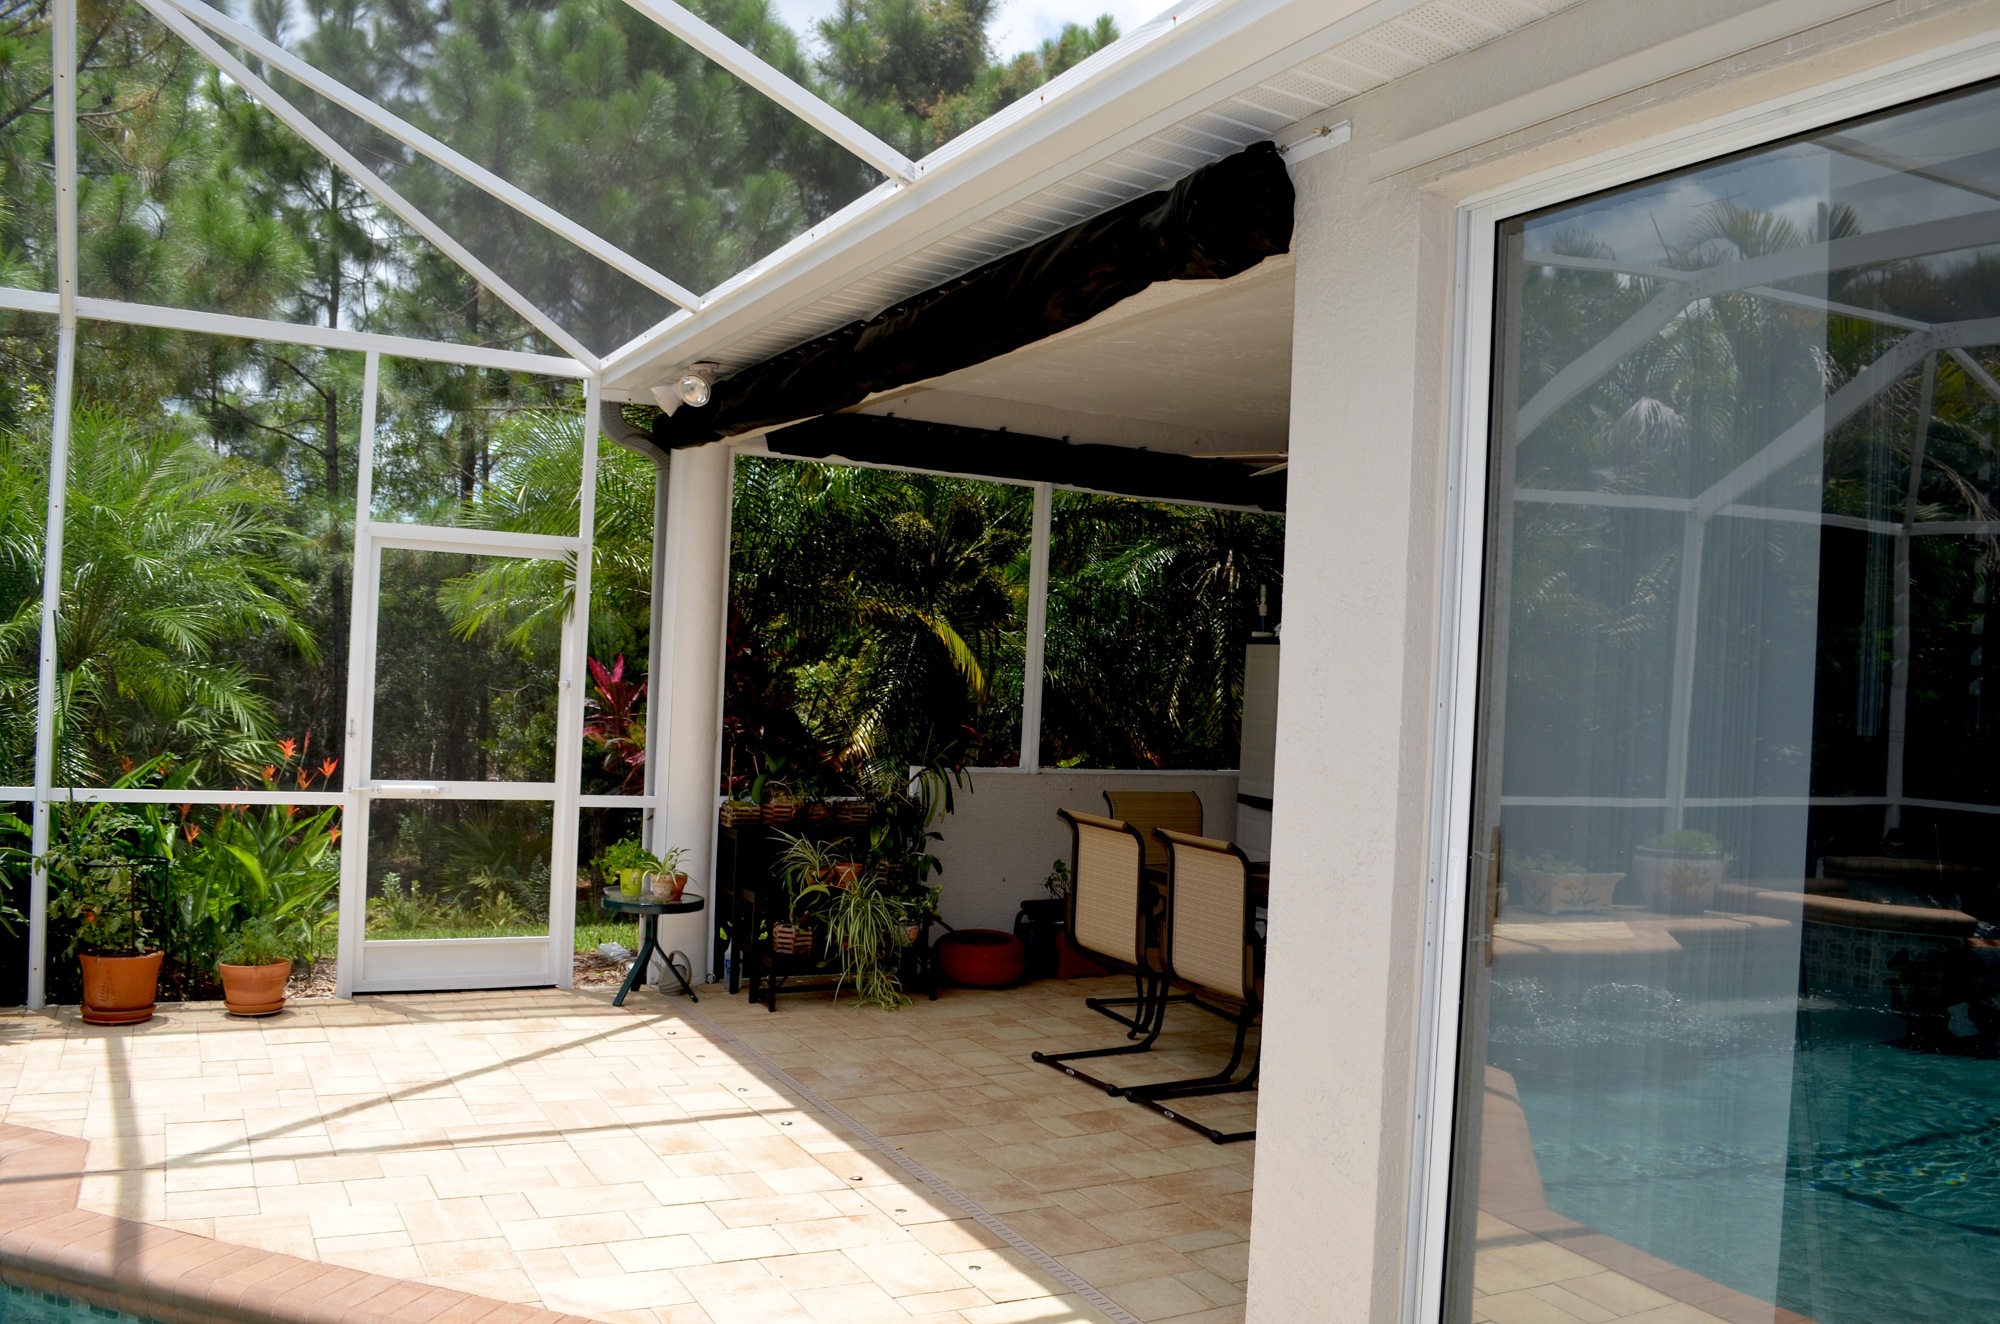 A wind screen is a velcro-meets-mesh material that protects the O'Briens' patio, from the pool to sliding glass doors in the living room. The screen covers 45% of the windows in the couple's home, and it takes two hours to unroll and put it in place.